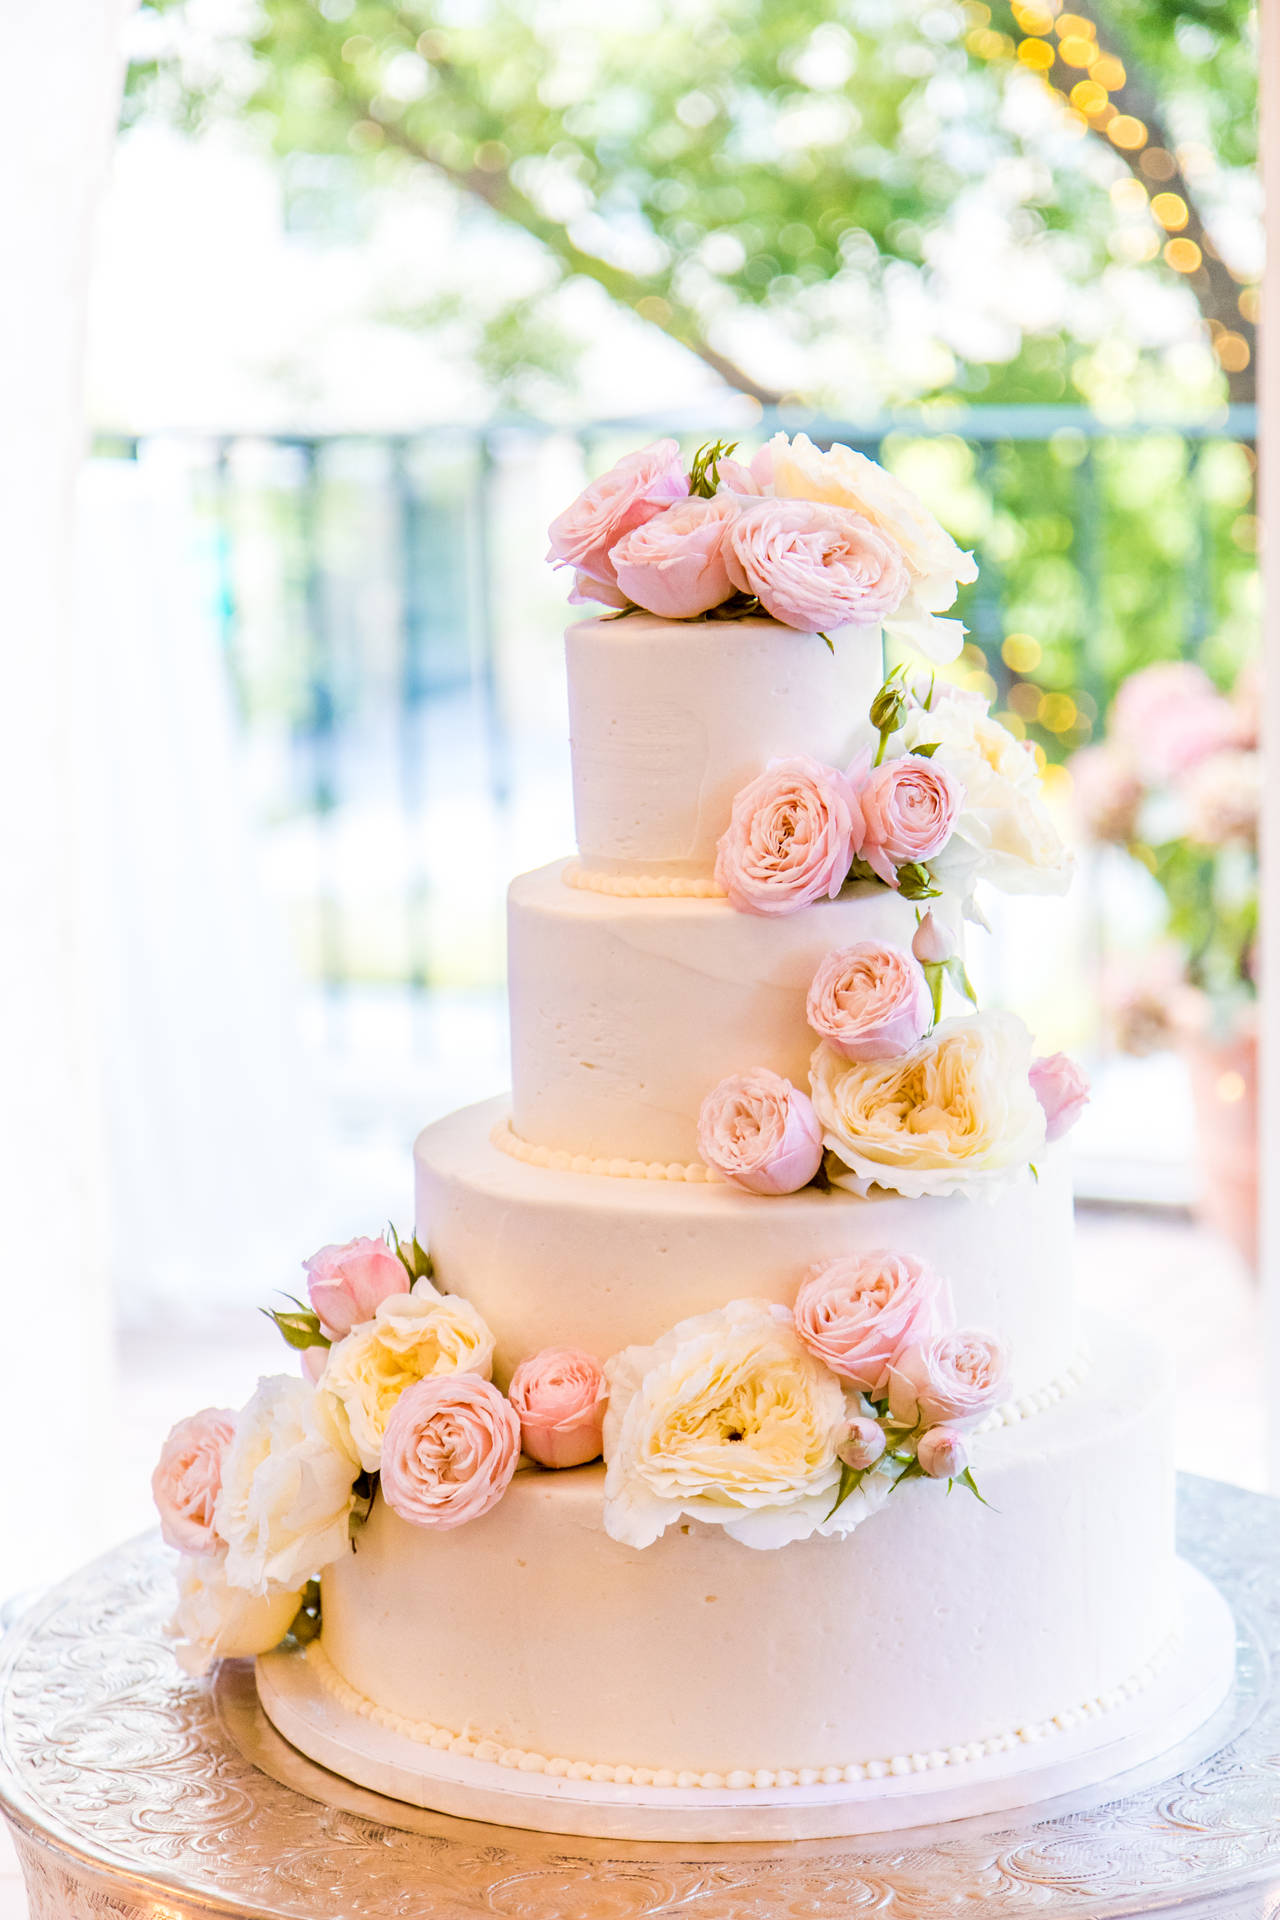 Four Tiered Round Floral Wedding Cake Wallpaper